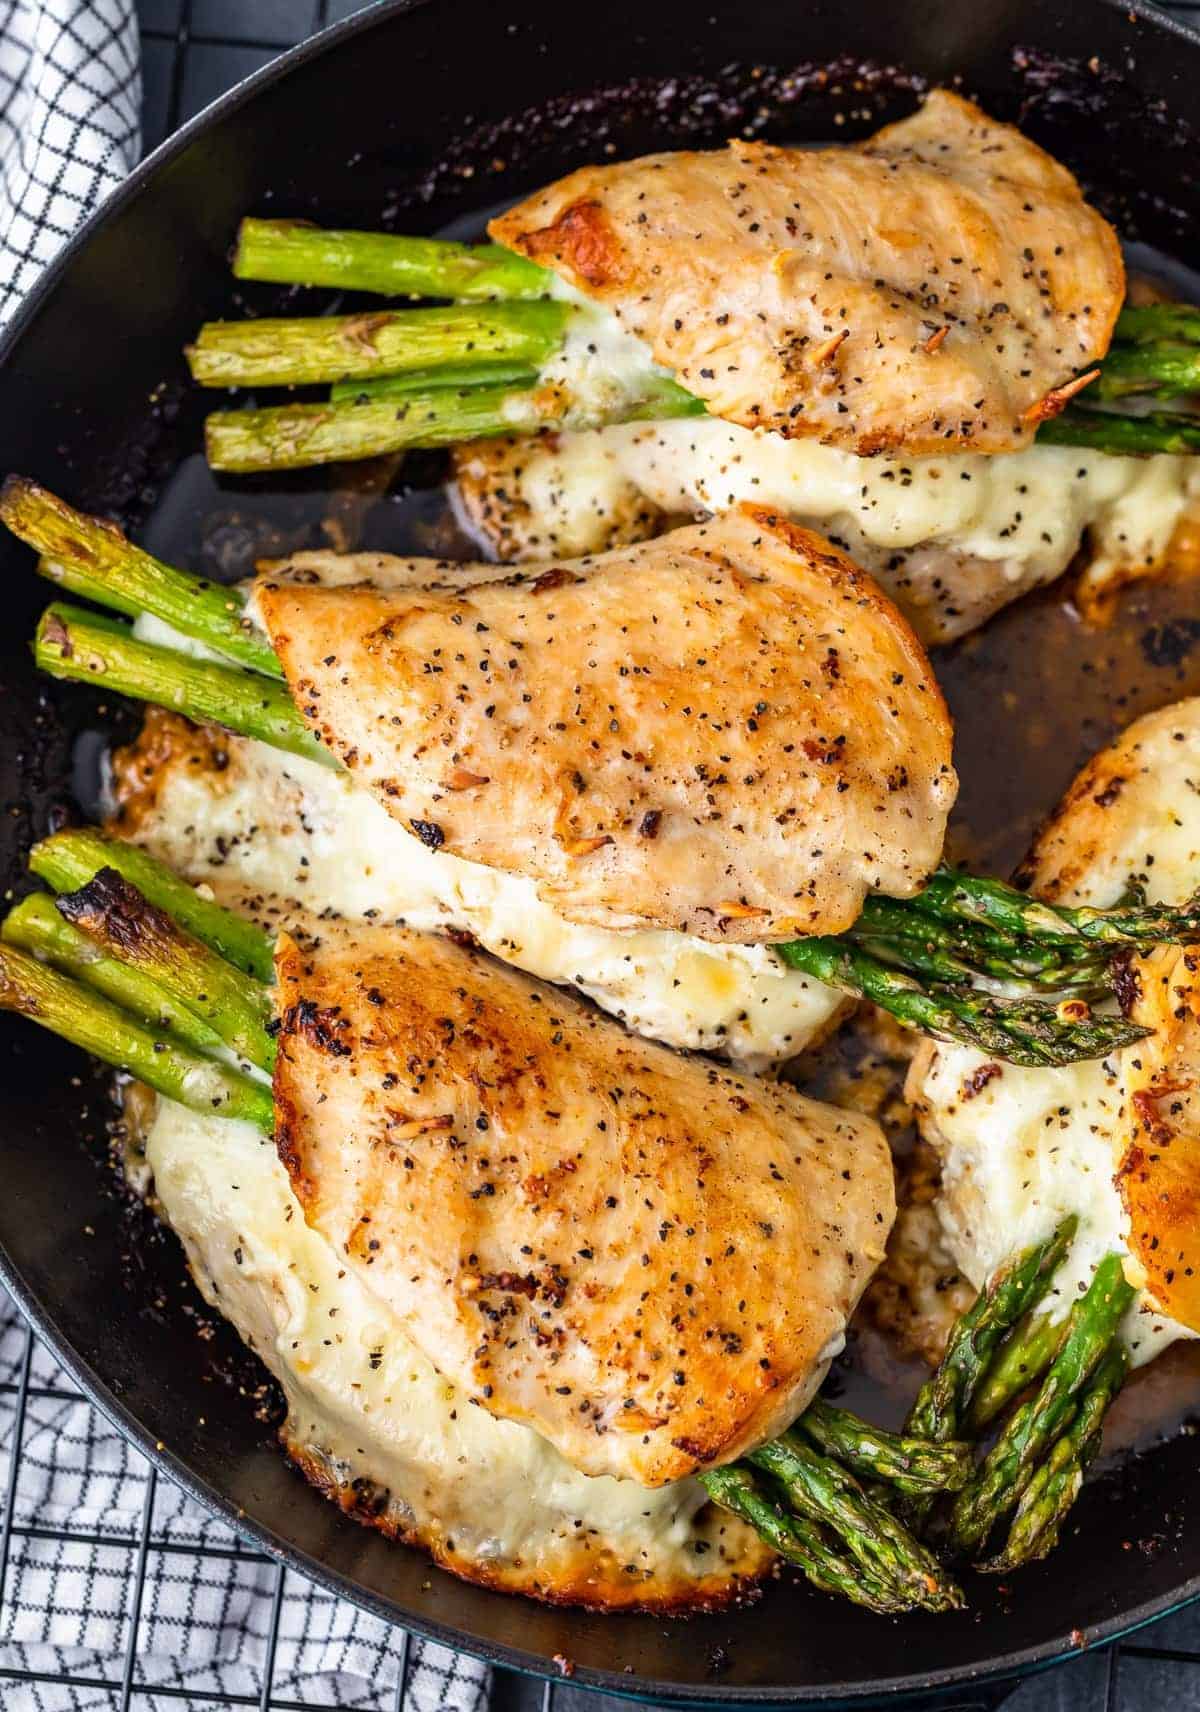 Boneless chicken breast recipes for two